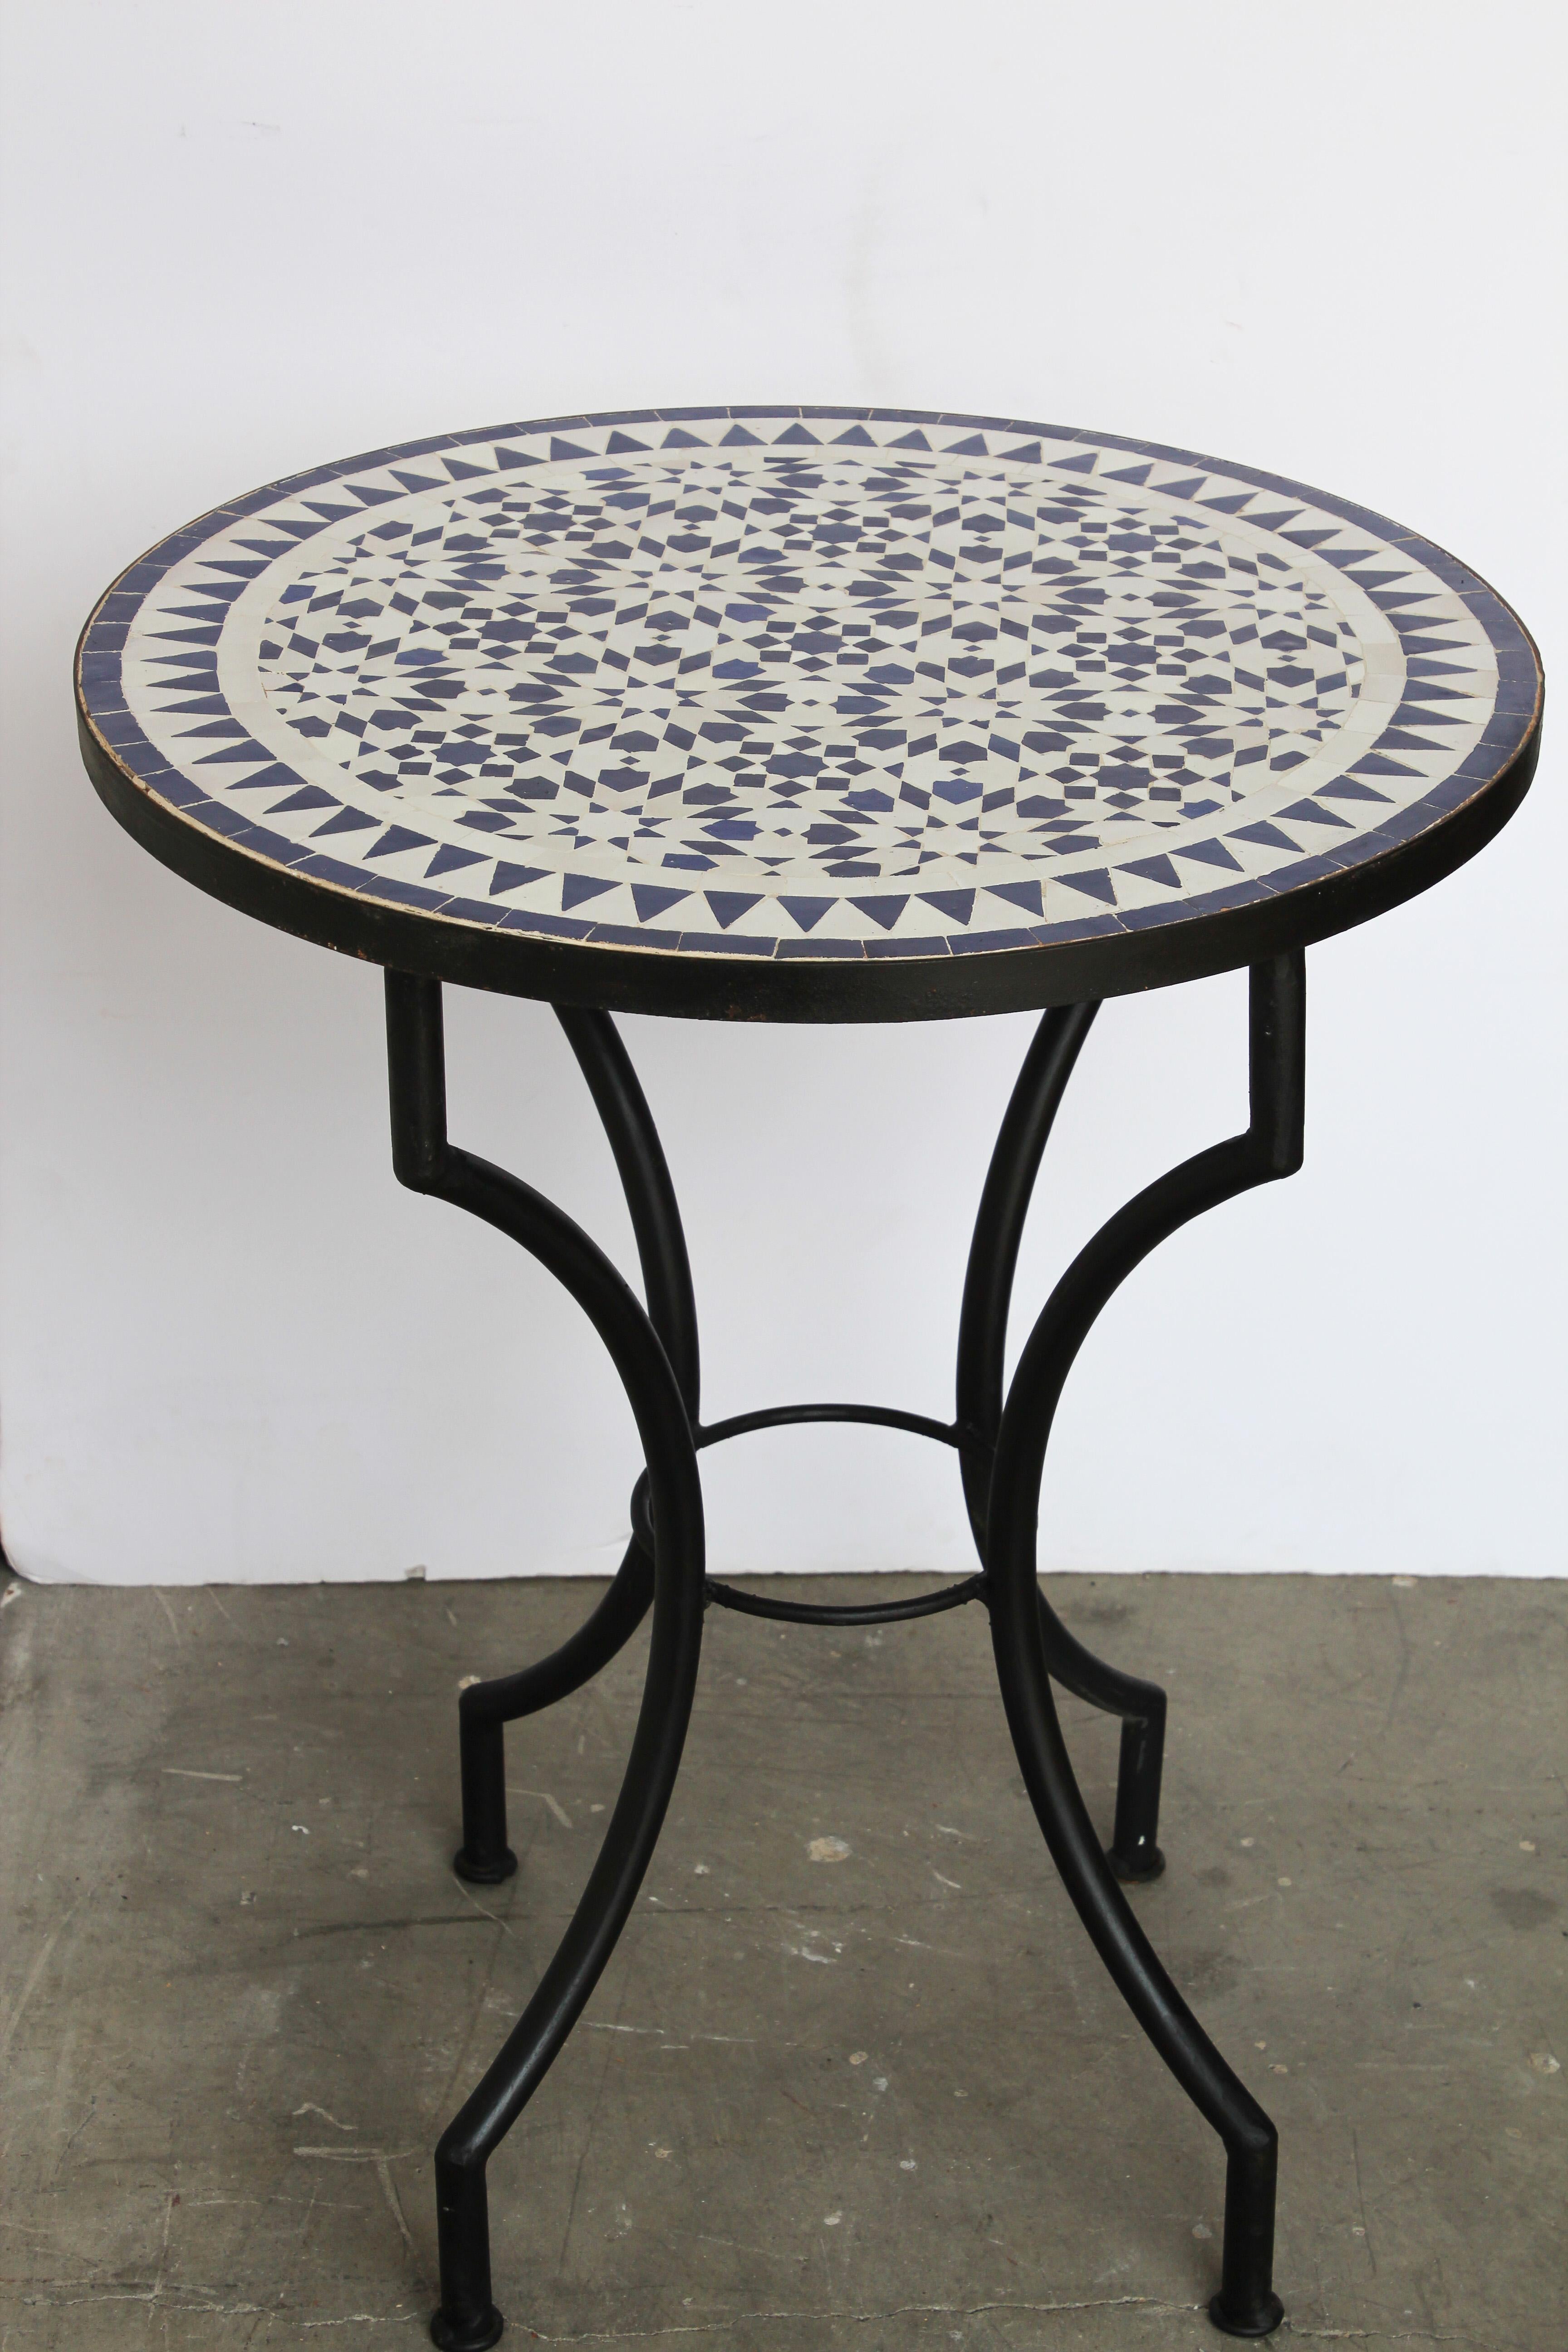 Moroccan Fez Mosaic Blue and White Tiles Bistro Table 3